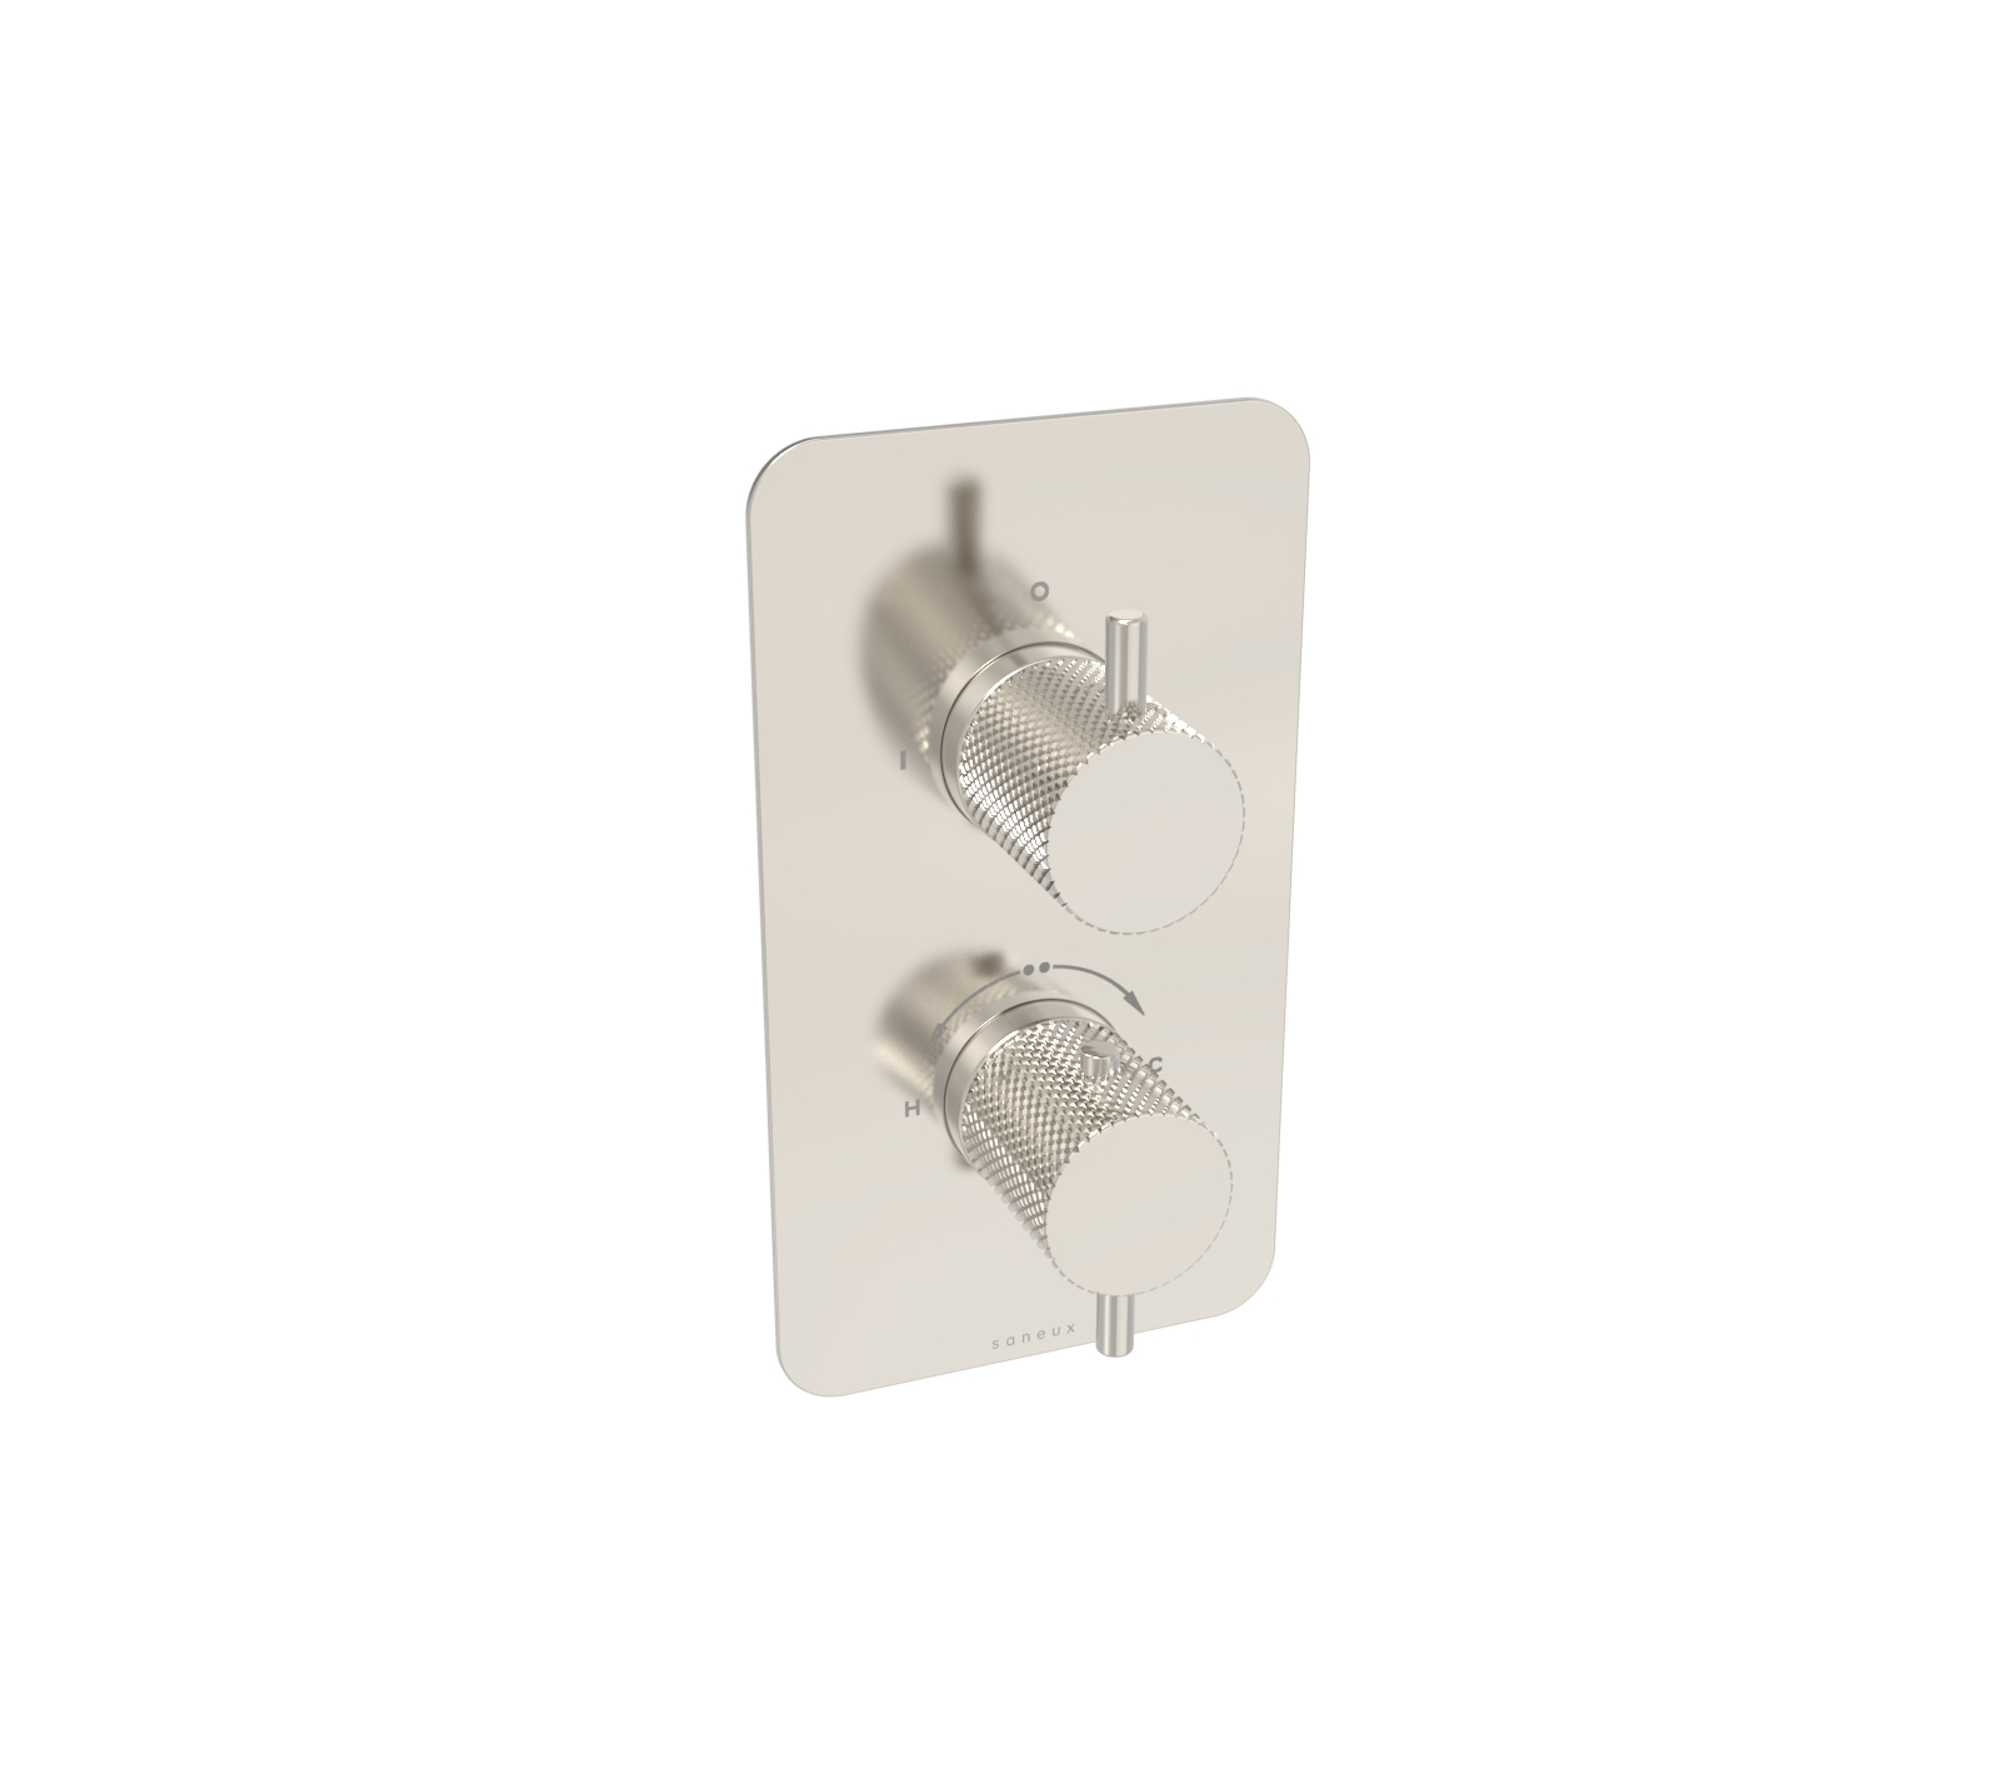 COS 2 way thermostatic shower valve kit with knurled handles - Brushed Nickel